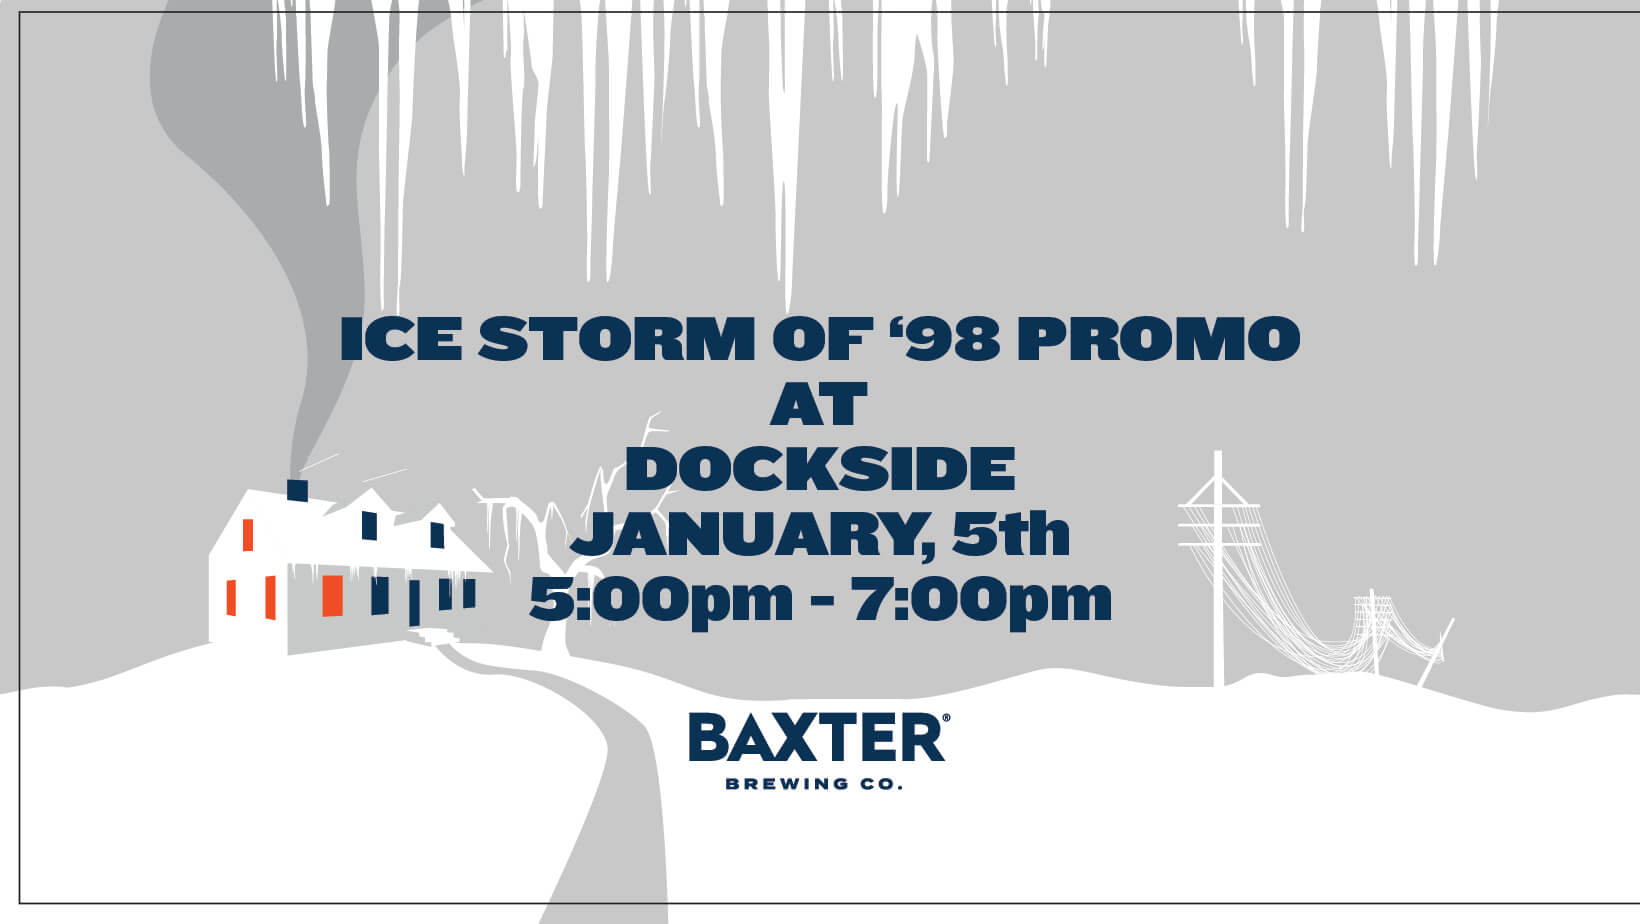 Image promoting an event at Dockside promoting our beer Ice Storm of '98